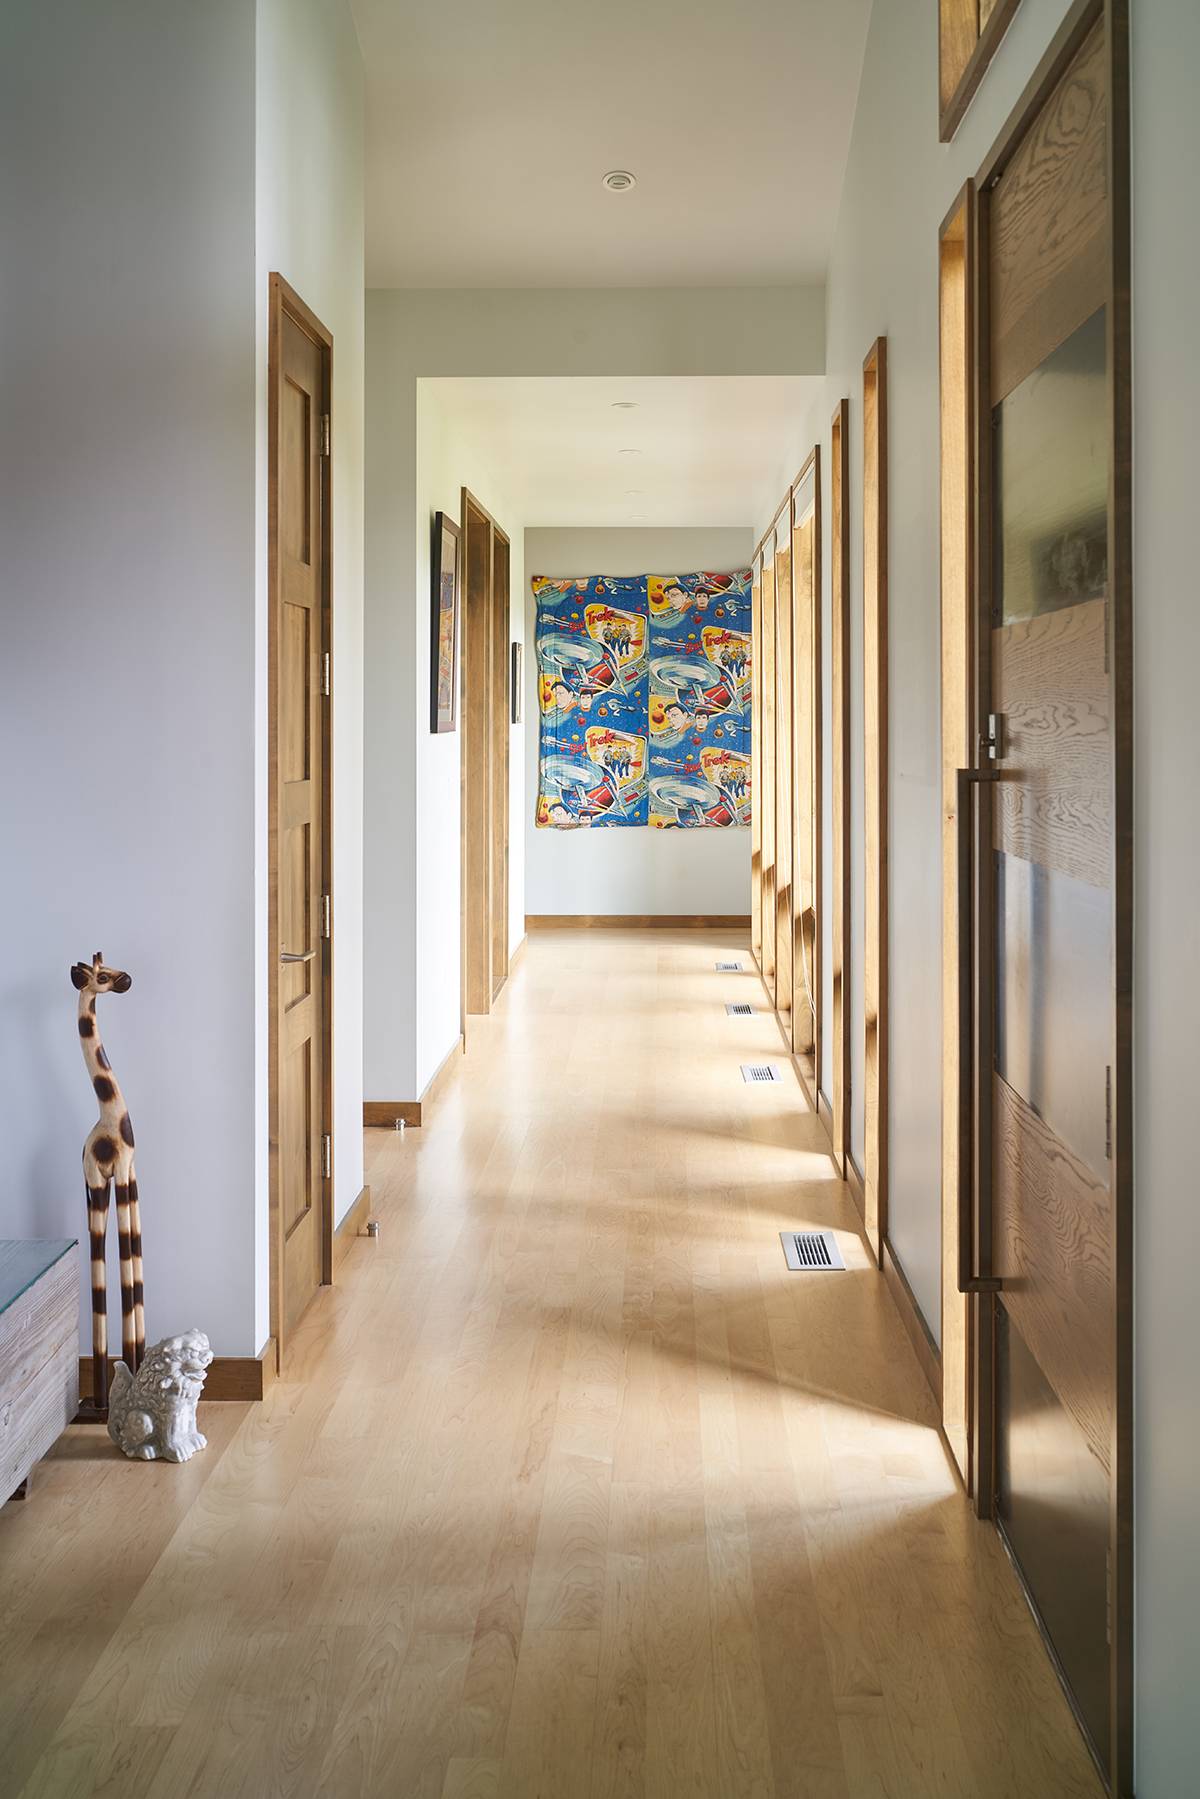 Interior view of the hallway at G&T House, a custom home designed and built by Farmer Payne Architects.